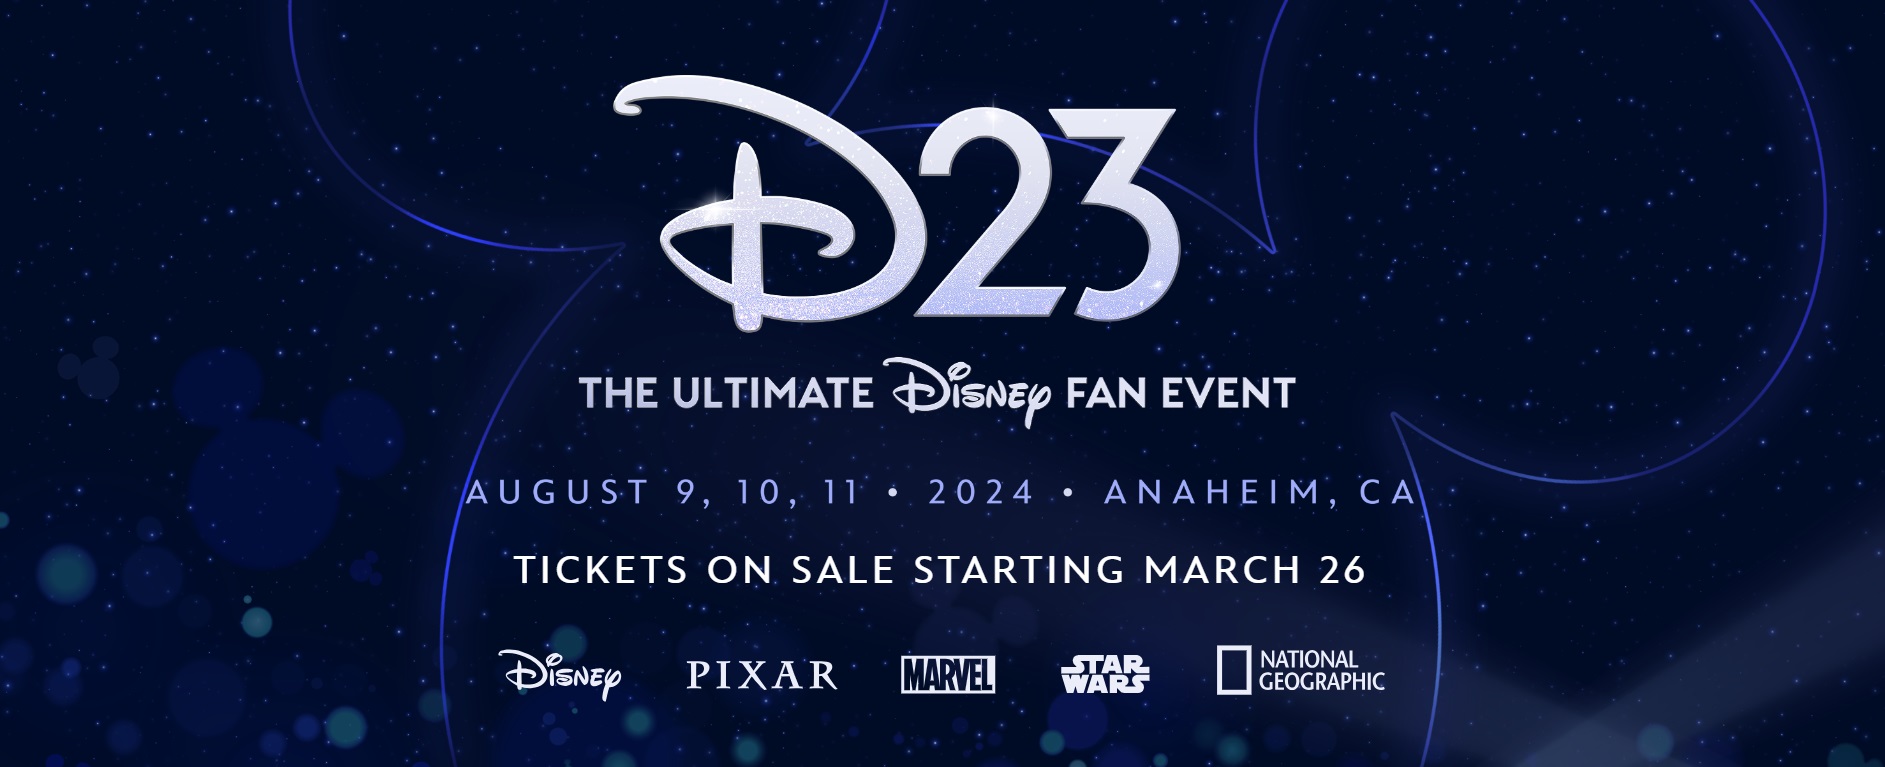 D23 The Ultimate Disney Fan Event Tickets on Sale Date Announced